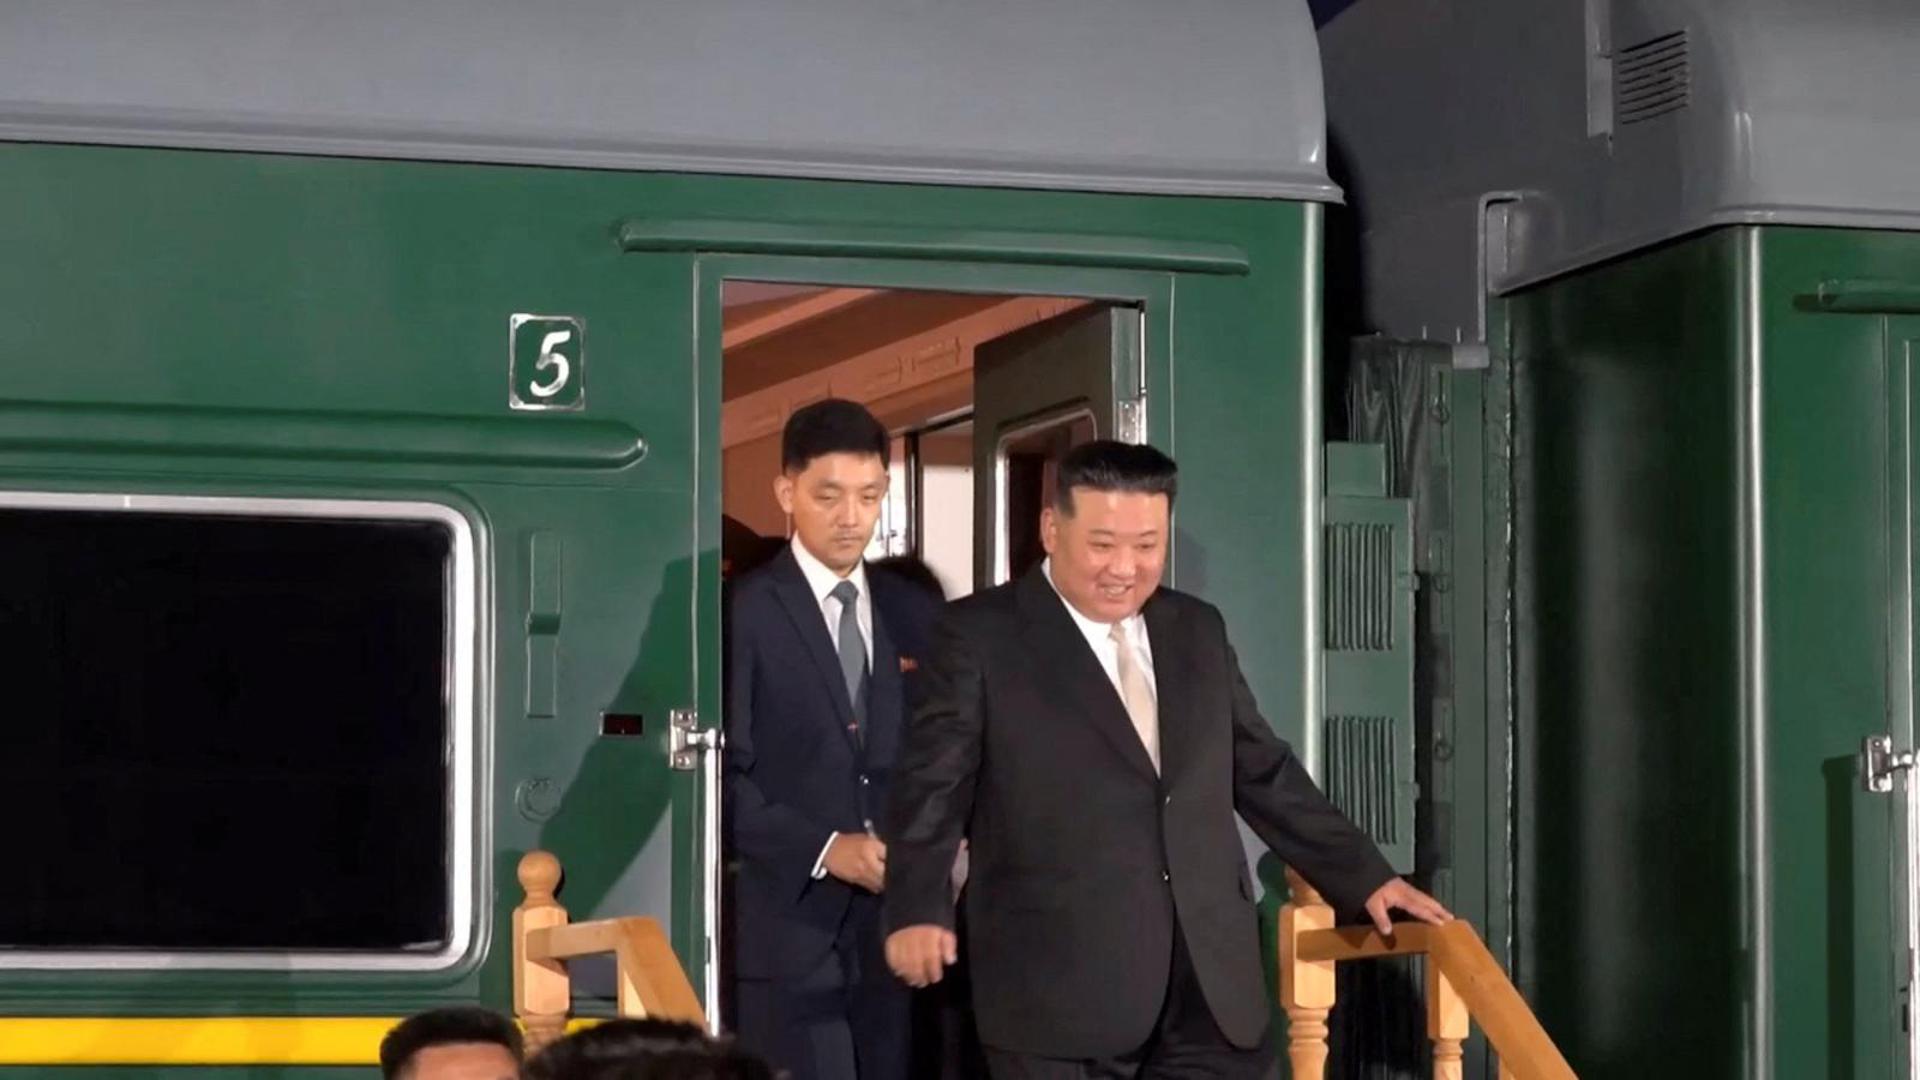 A view shows North Korean leader Kim Jong Un disembarking from his train and being greeted by Russian officials in Khasan in the Primorsky region, Russia, in this still image from video published September 12, 2023. Courtesy Governor of Russia's Primorsky Krai Oleg Kozhemyako Telegram Channel via REUTERS ATTENTION EDITORS - THIS IMAGE WAS PROVIDED BY A THIRD PARTY. NO RESALES. NO ARCHIVES. MANDATORY CREDIT. Photo: OLEG KOZHEMYAKO TELEGRAM CHANNEL/REUTERS